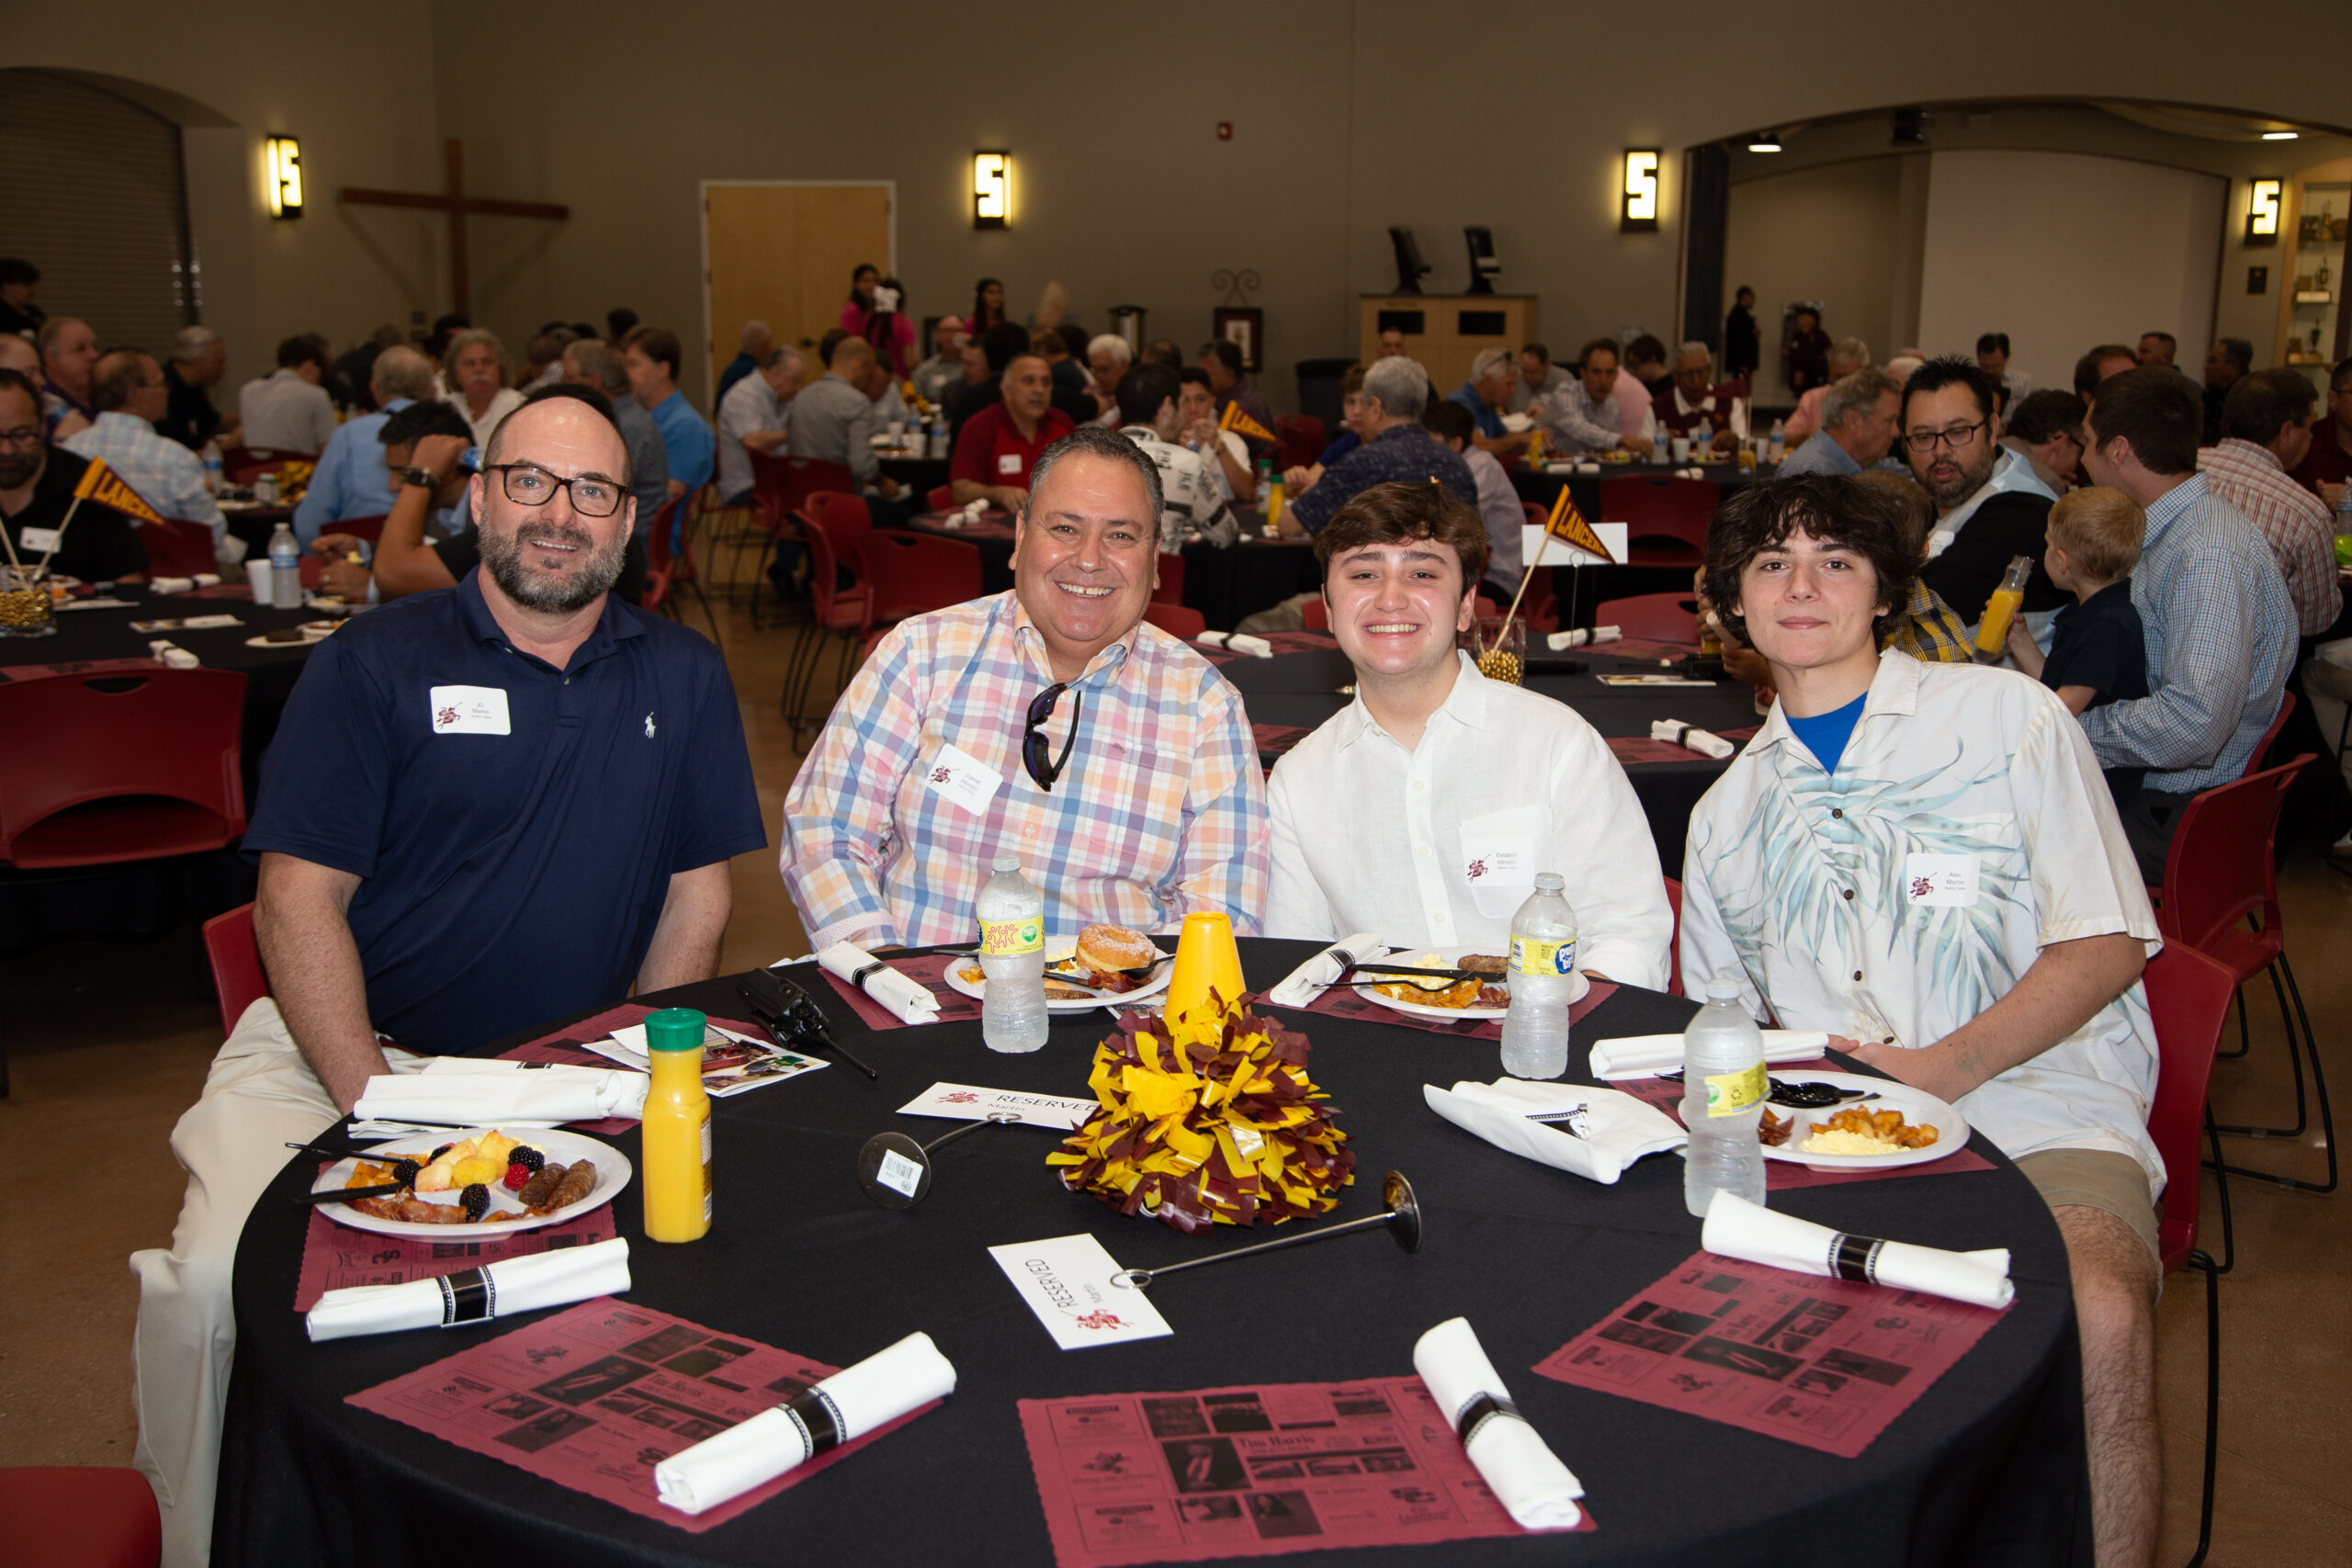 Parents and students at a table at an event